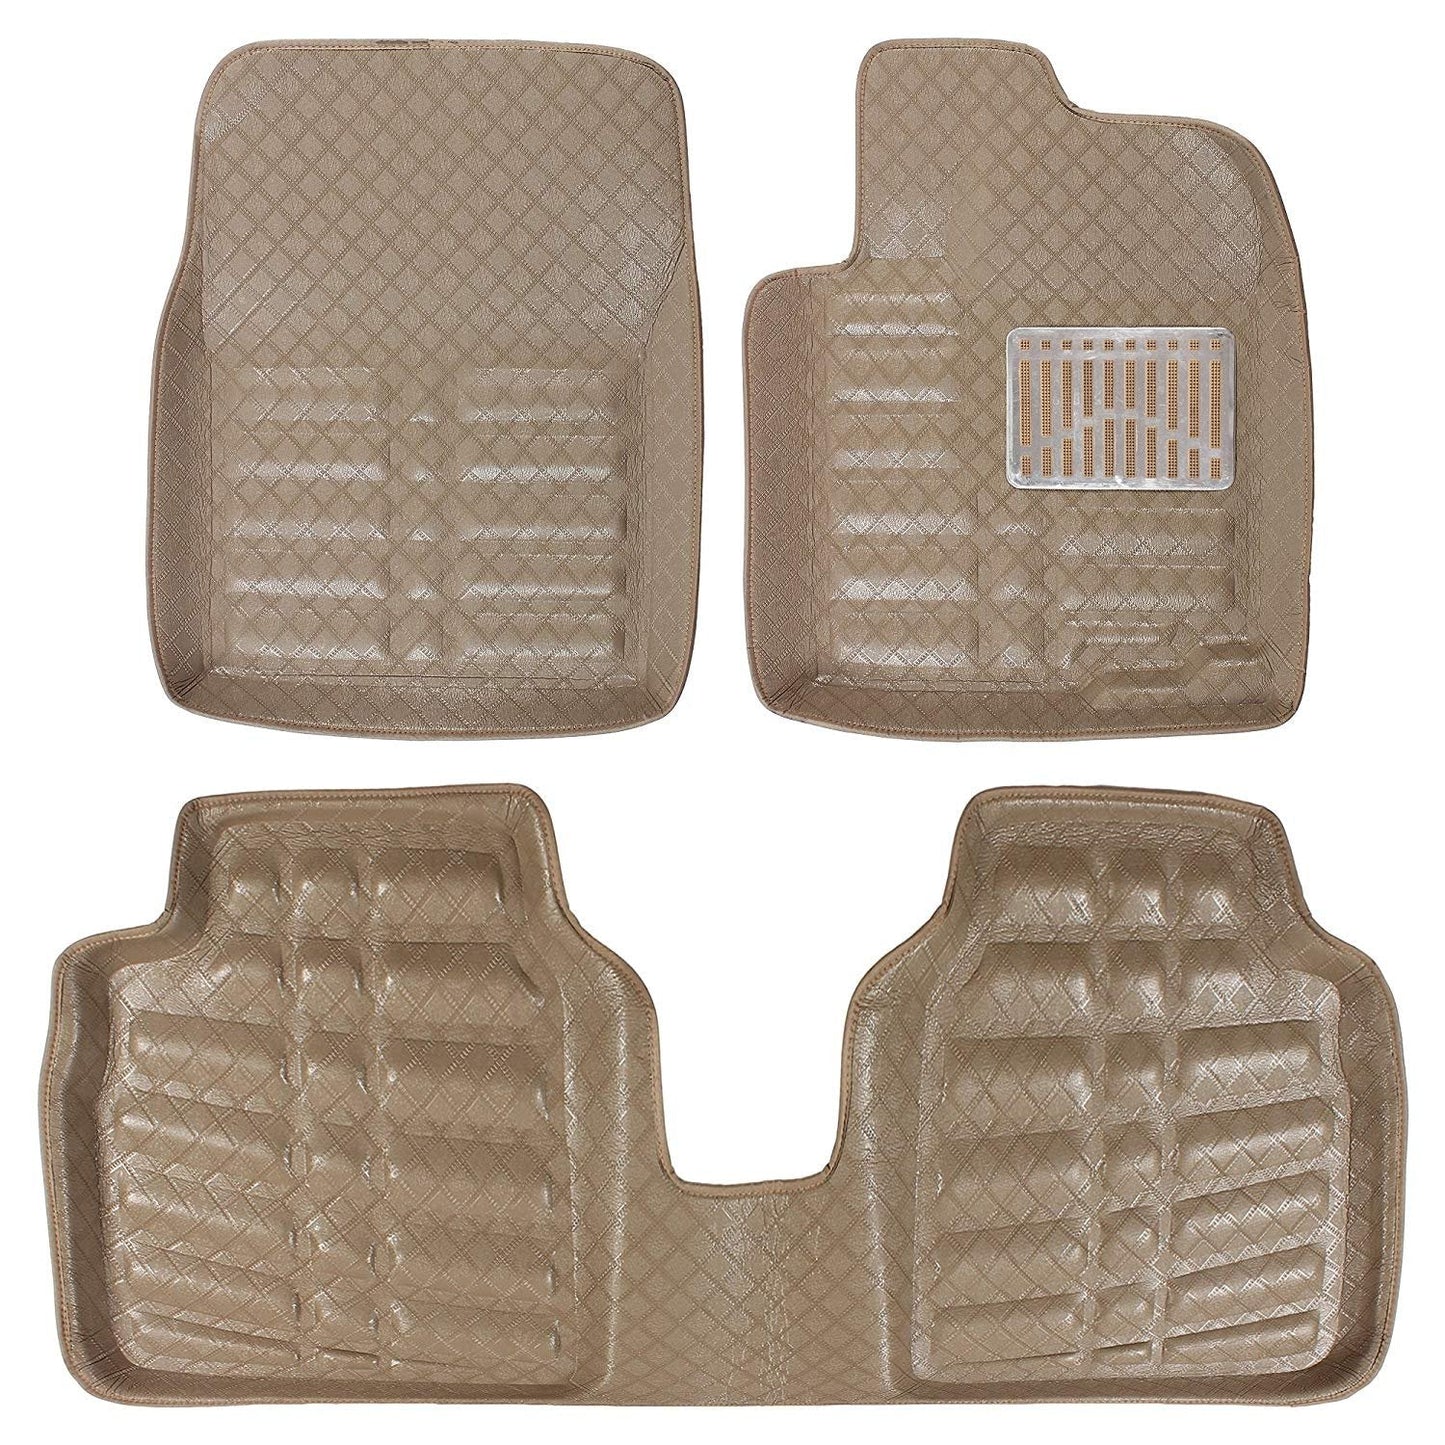 Oshotto 4D Artificial Leather Car Floor Mats For Toyota Etios - Set of 3 (2 pcs Front & one Long Single Rear pc) - Beige